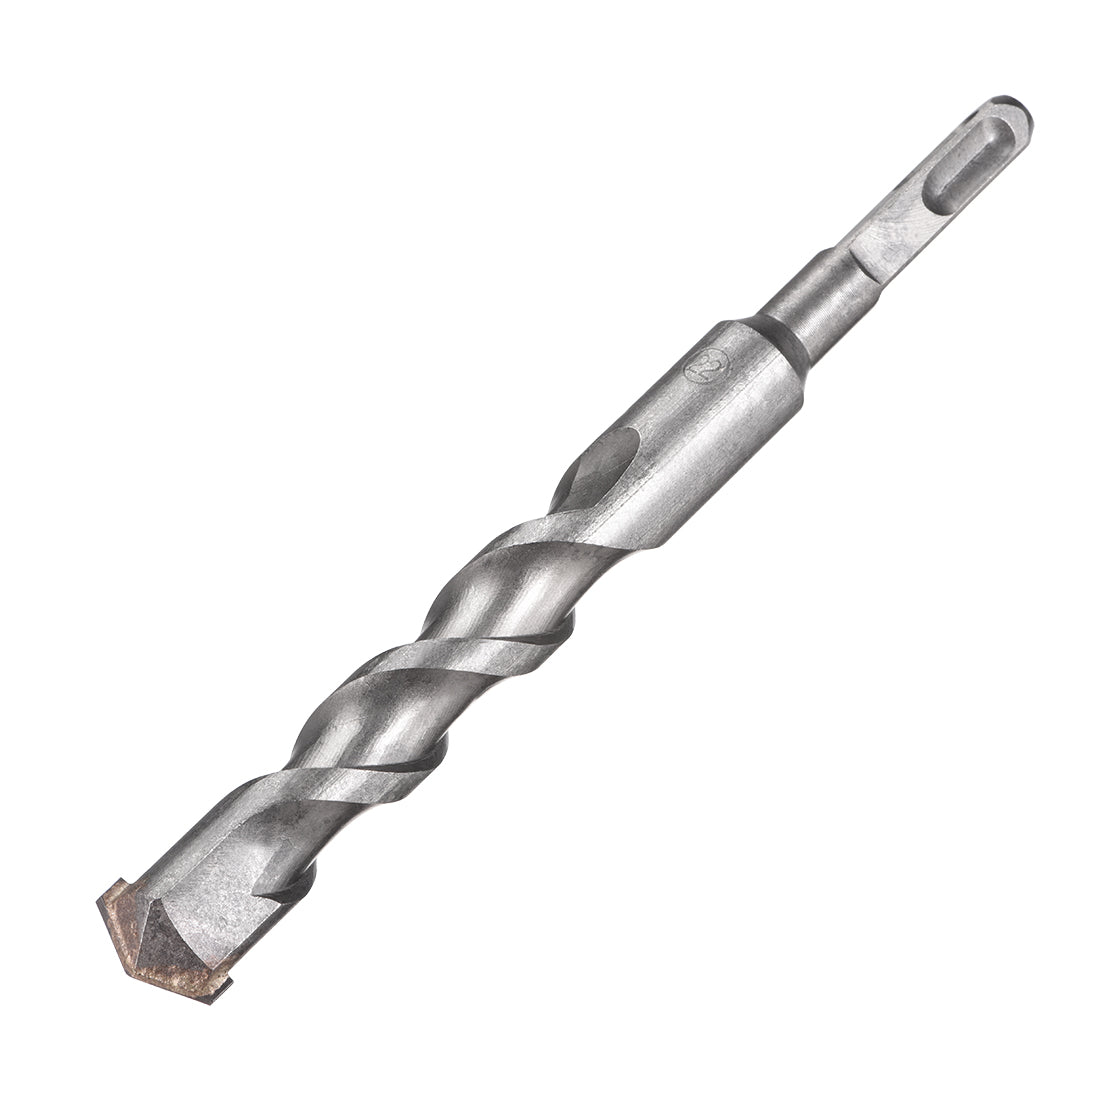 uxcell Uxcell 22mm Carbide-Tipped Rotary Hammer Hollow Square Shank Drill Bit 195mm Long